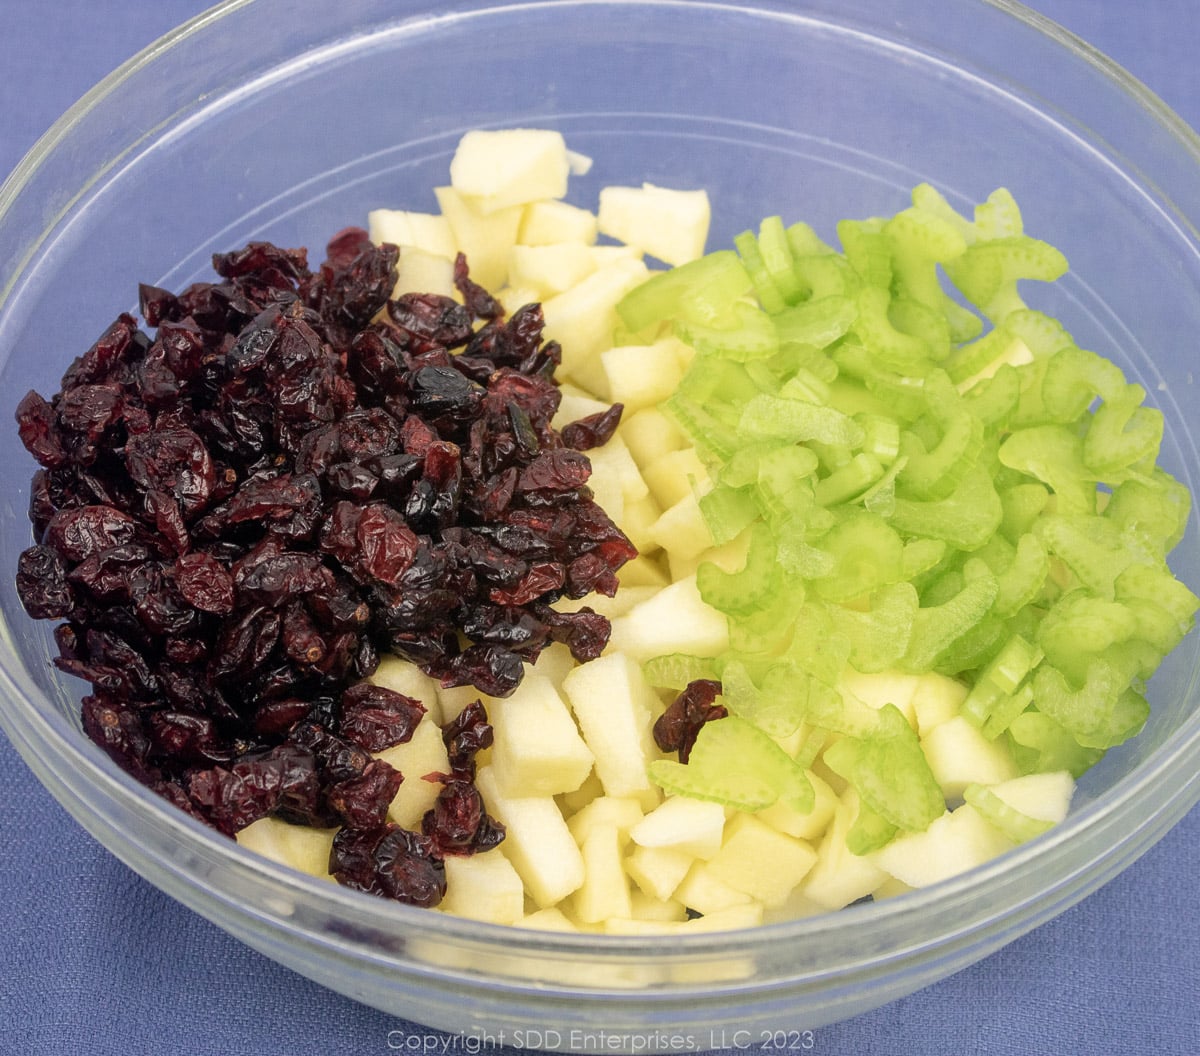 prepared dried cranberries, apples and celery for chicken salad